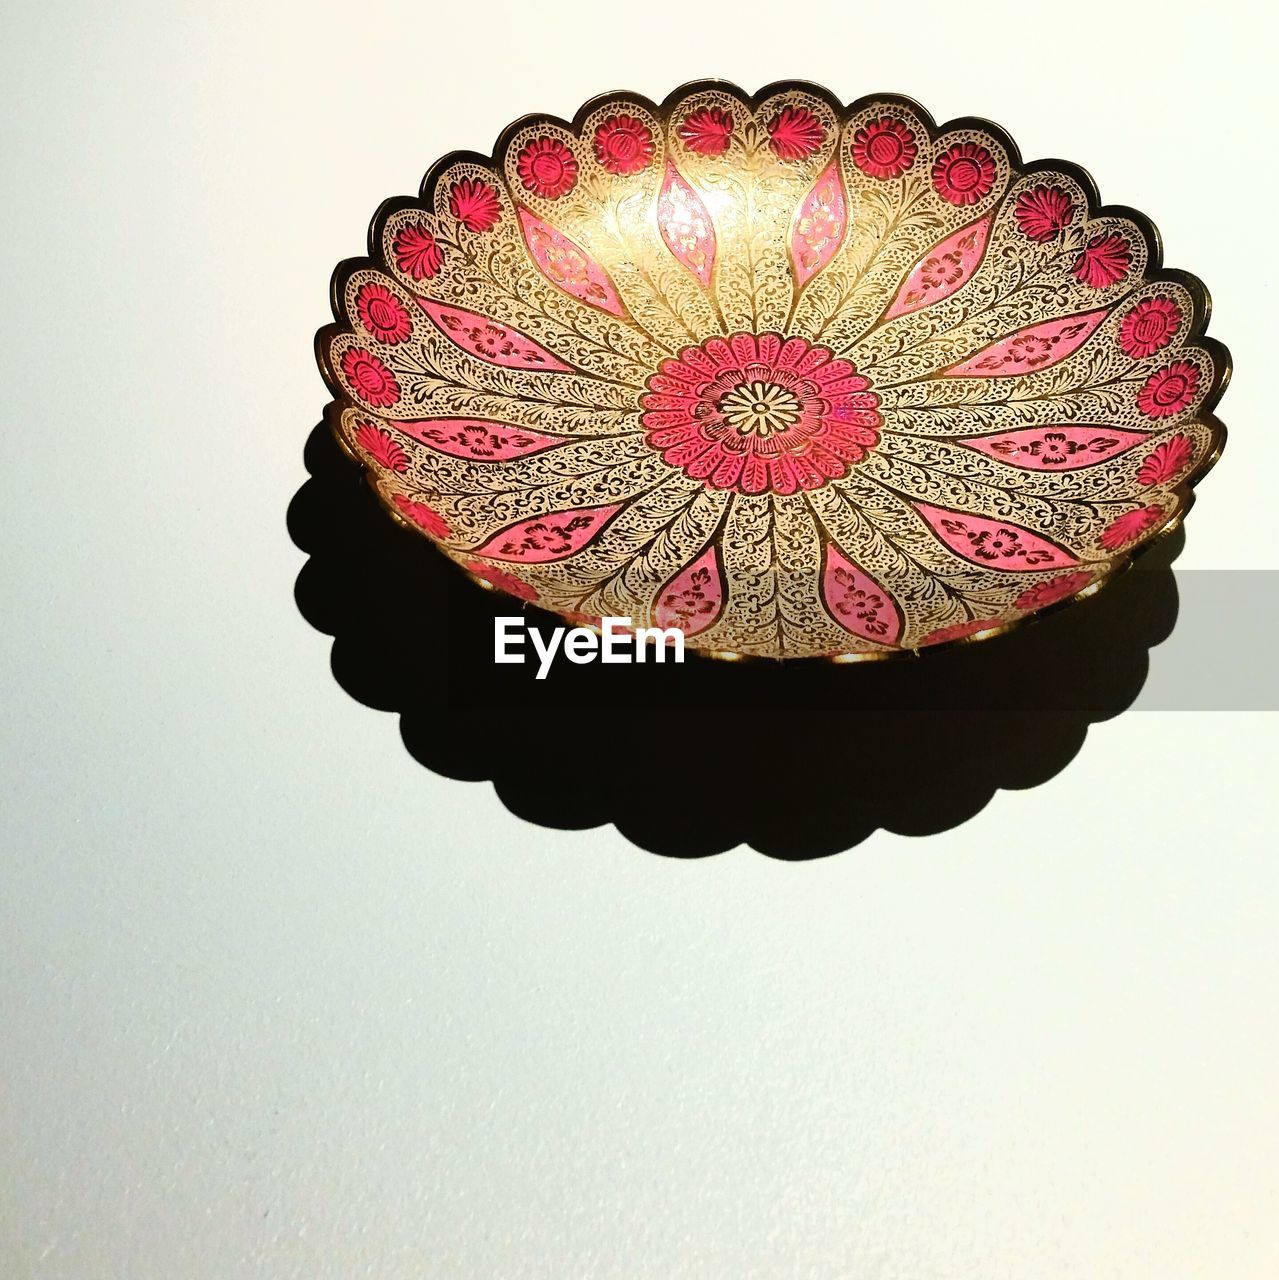 Flower shape plate decorated with central flower